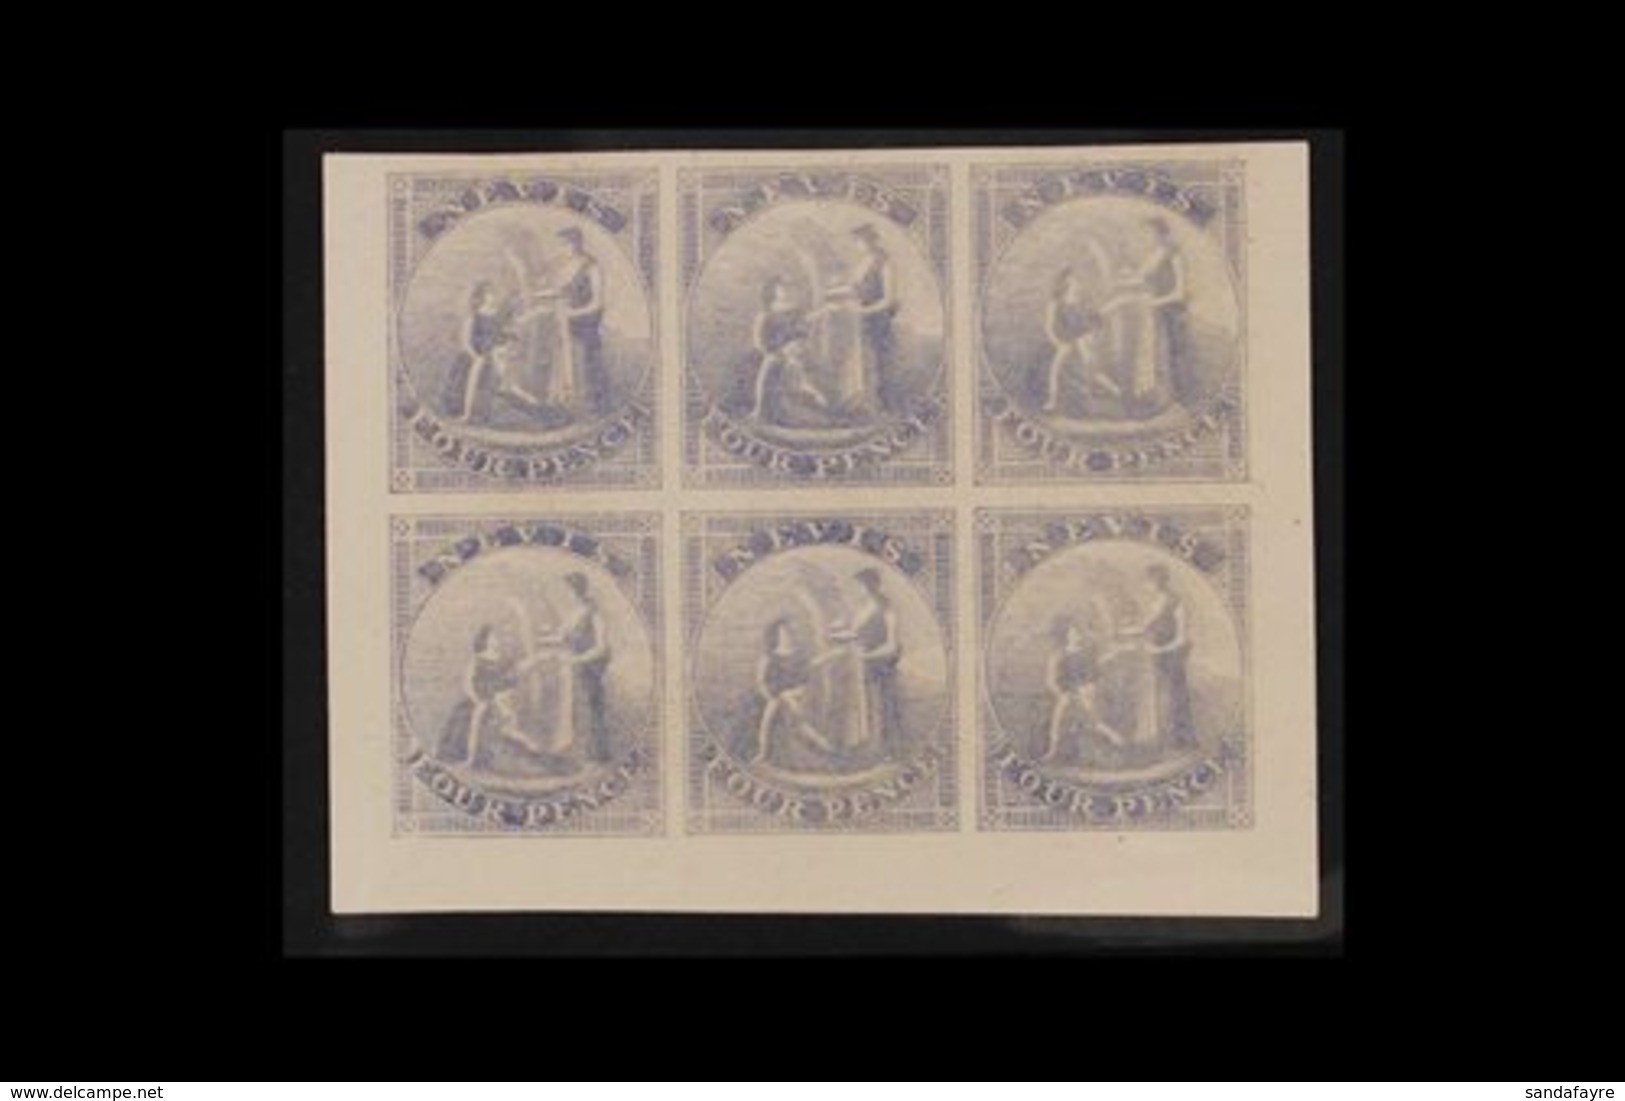 1862 IMPERF PROOFS.  4d Violet-grey (as SG 2) IMPERF COLOUR PROOFS BLOCK Of 6 (positions 7 To 12) Printed In Unissued Co - St.Christopher-Nevis-Anguilla (...-1980)